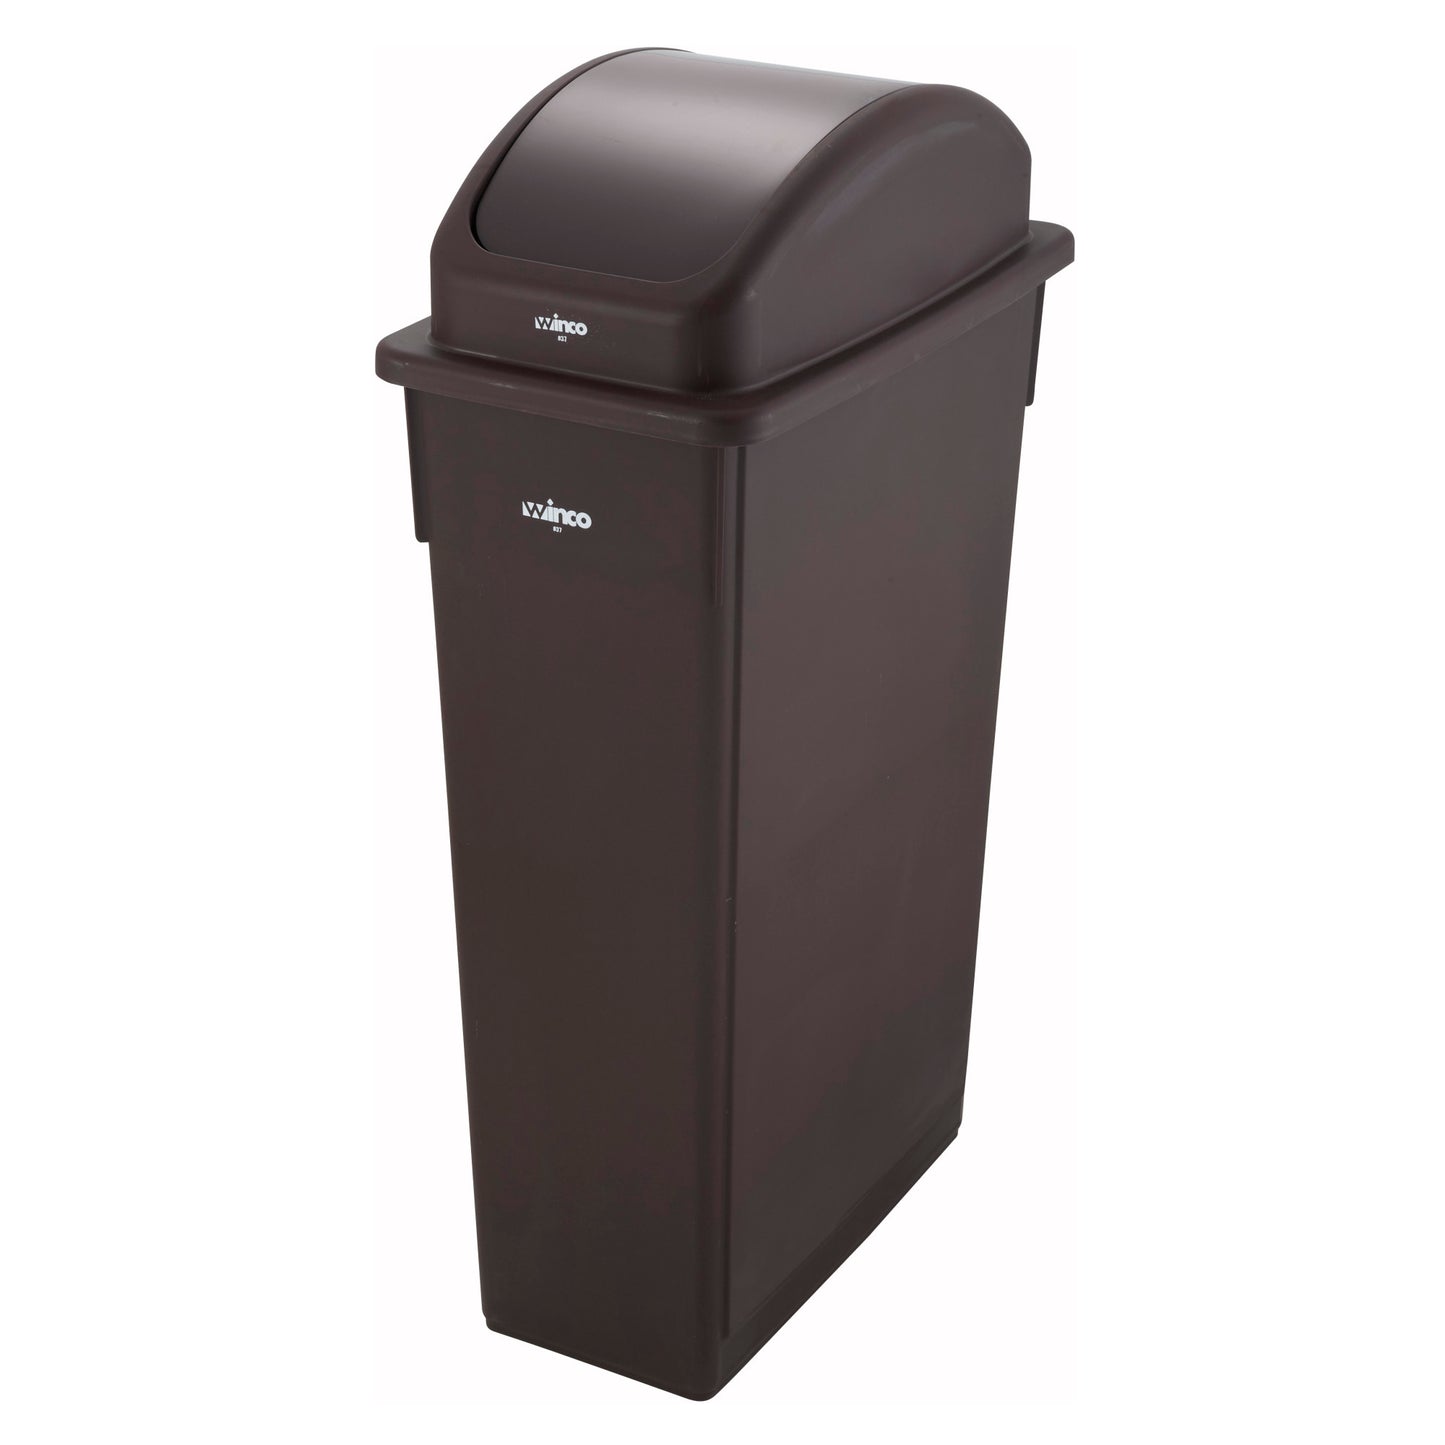 PTCL-23B - Swing Lid for 23 Gallon Slender Trash Cans - Brown